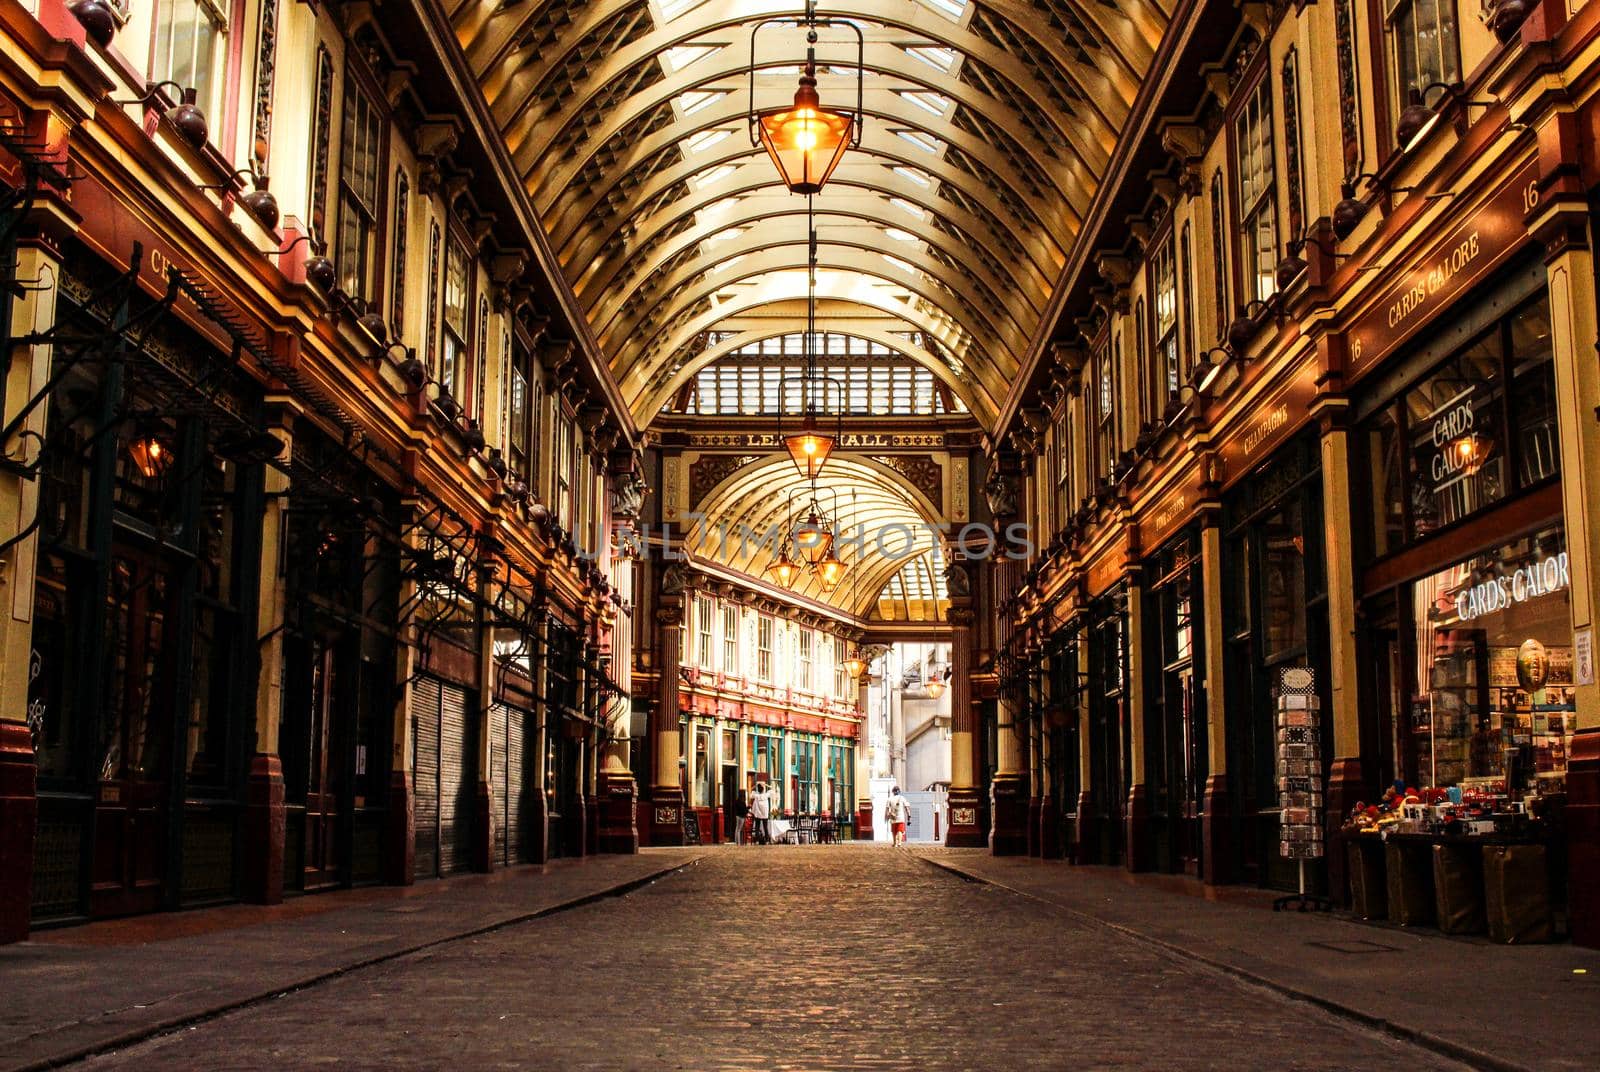 'Leadenhall market' and its' shopping stores from ground view, central London, UK. High quality photo.